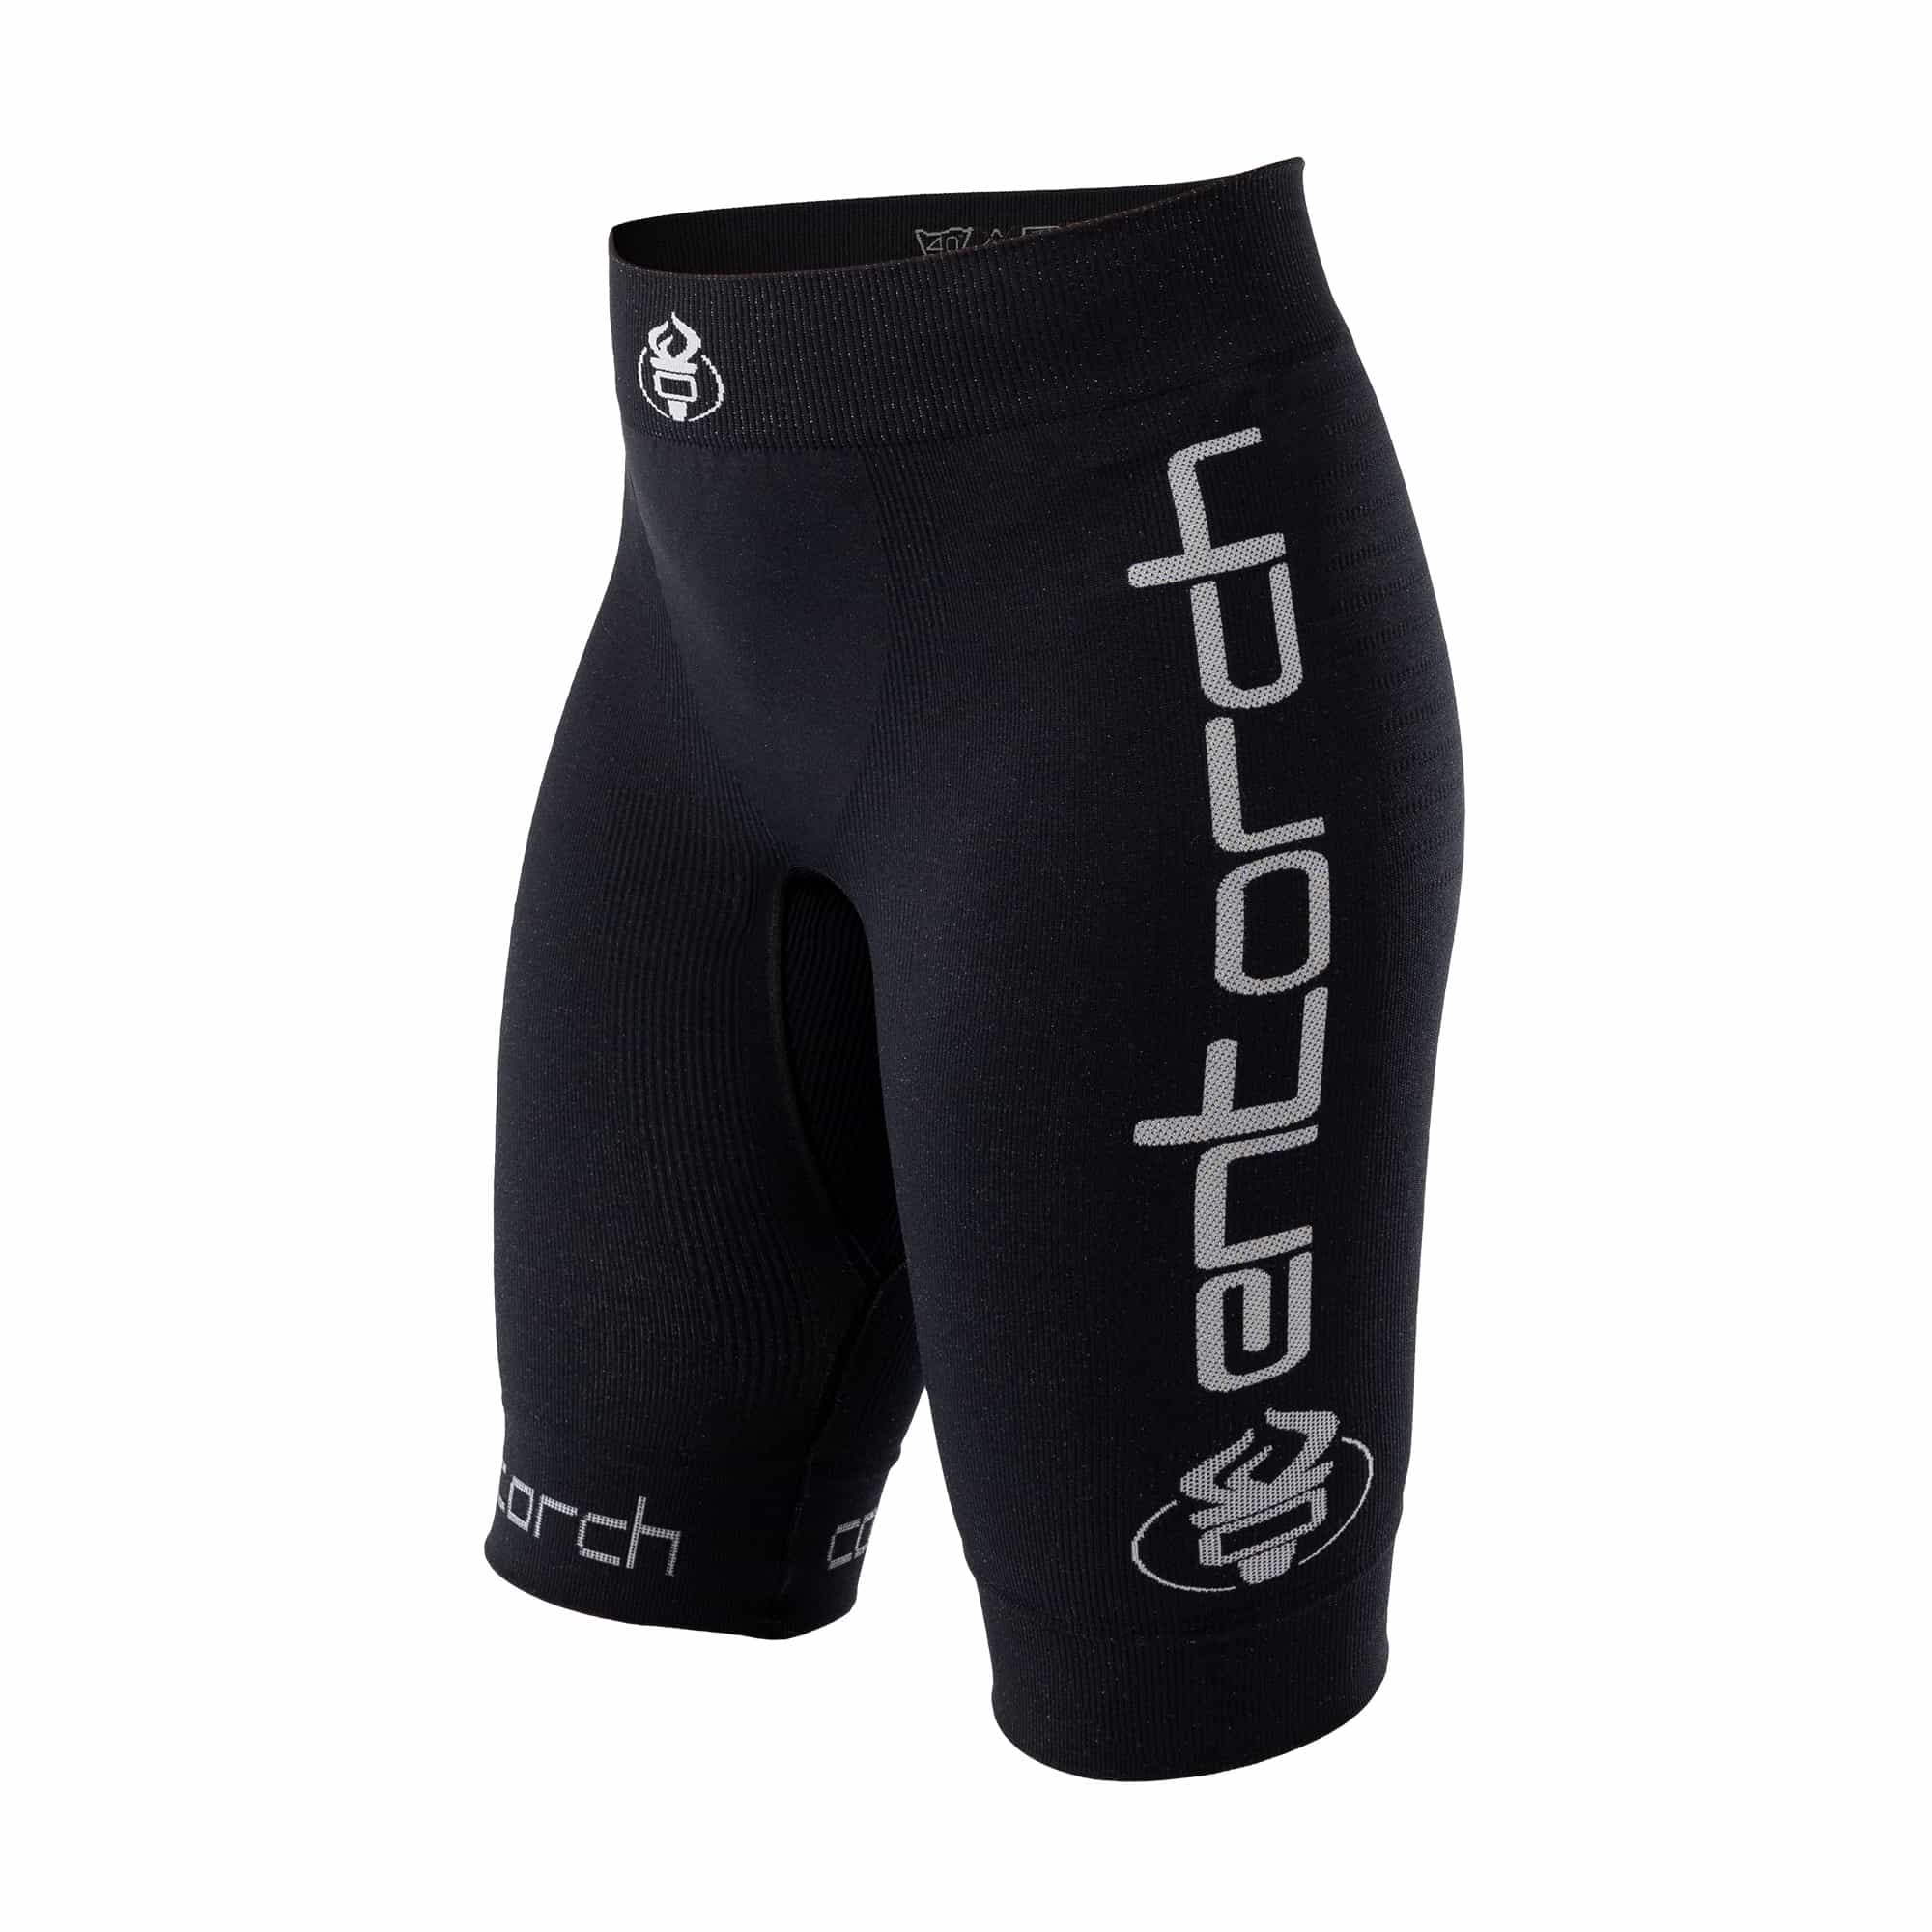 entorch Action Shorts korte compressieshort unisex met Protection Patch